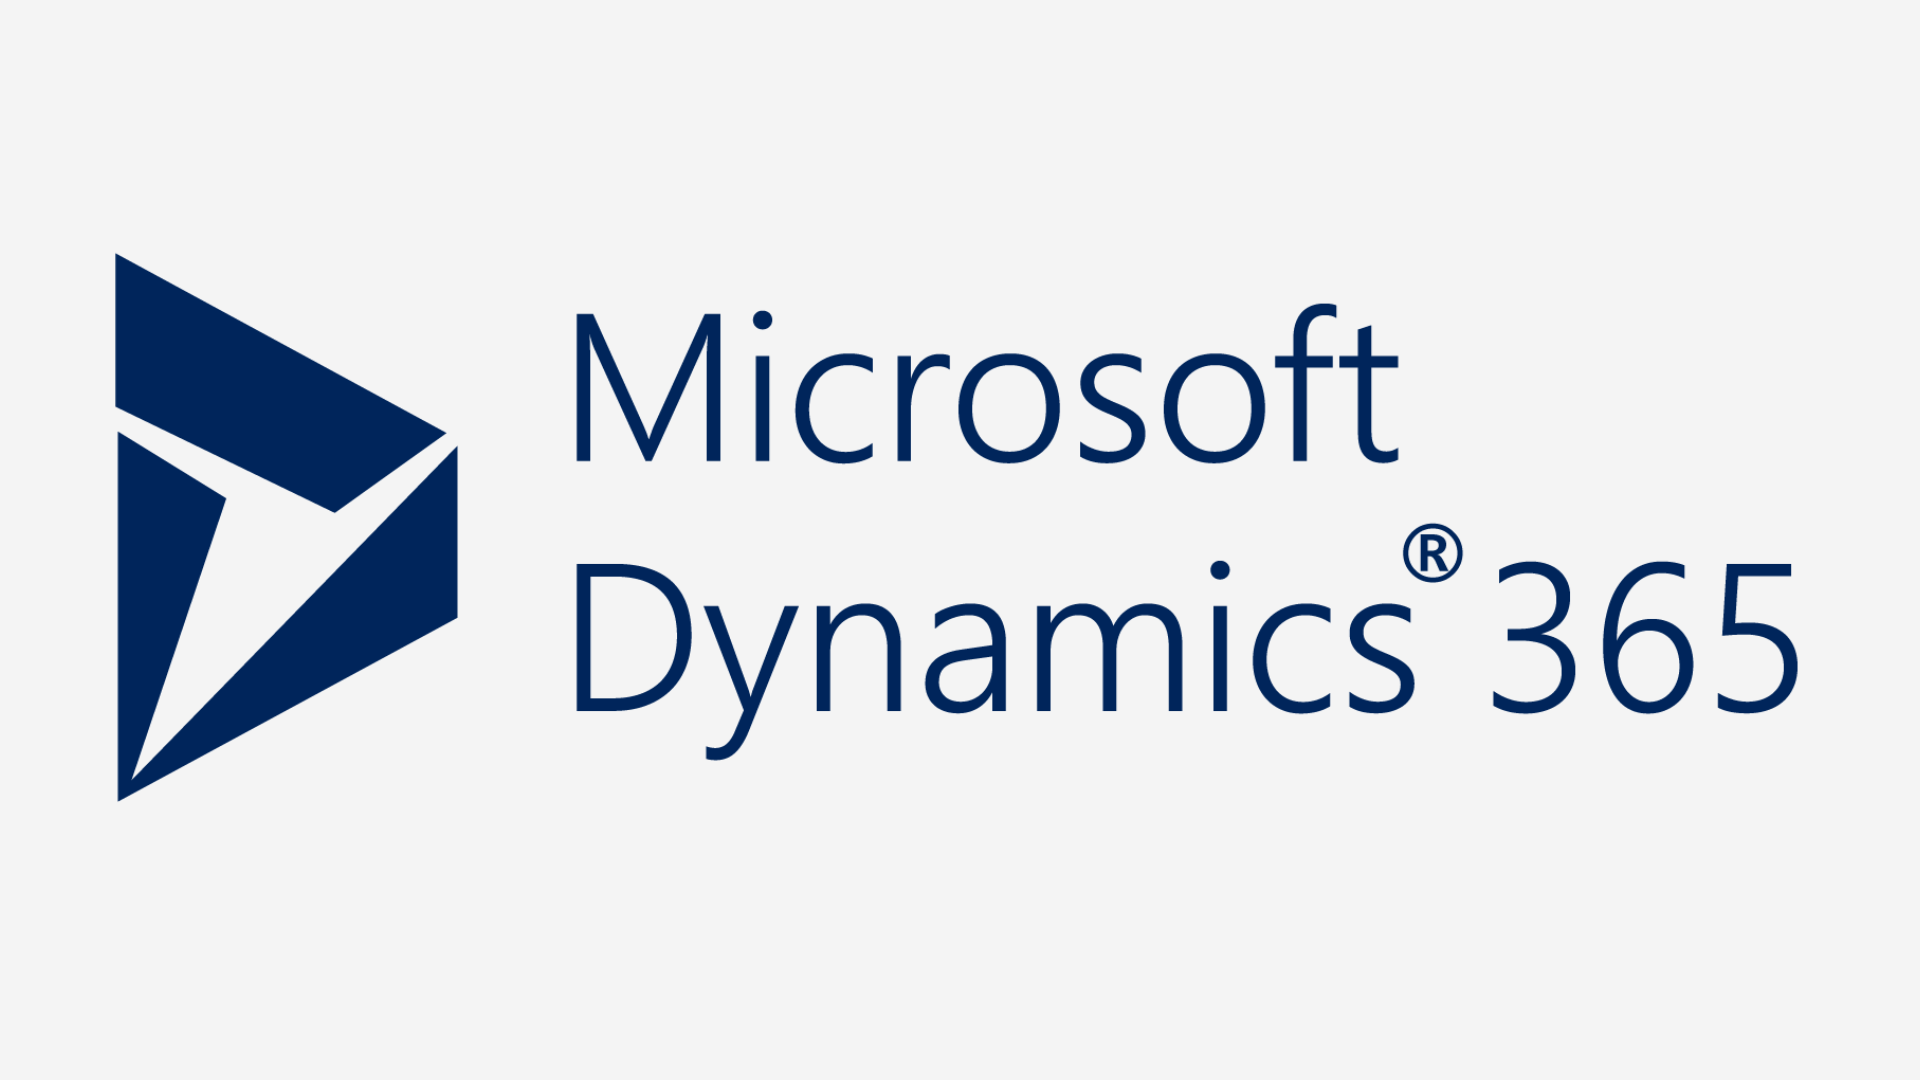 Microsoft Dynamics 365 competence at TheWorkinGroup